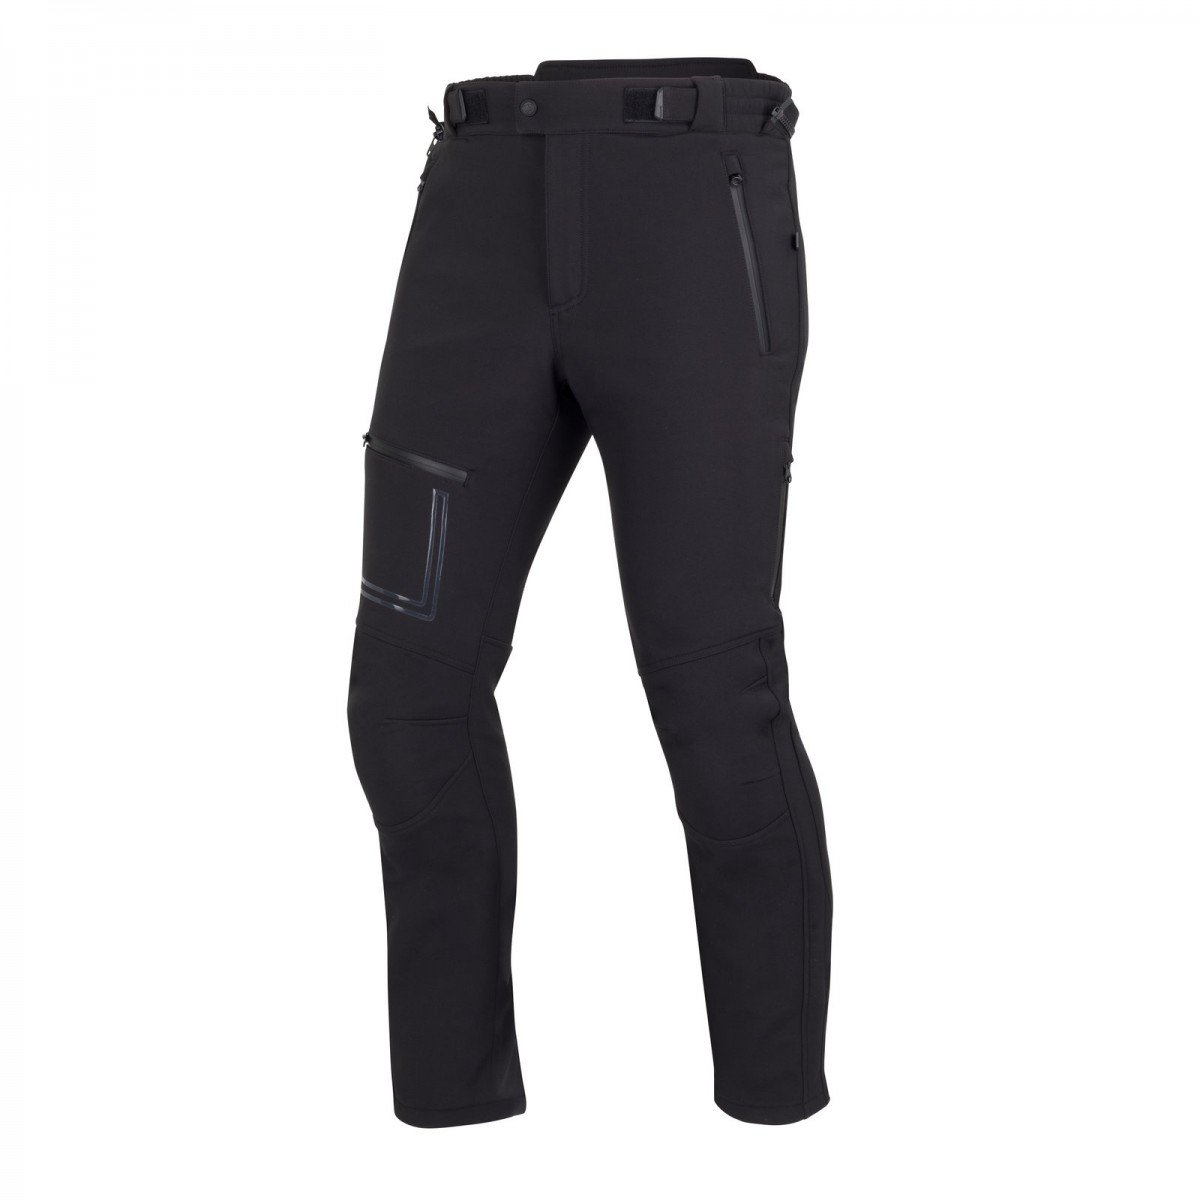 Image of Bering Alkor Trousers Black Size S ID 3660815150771